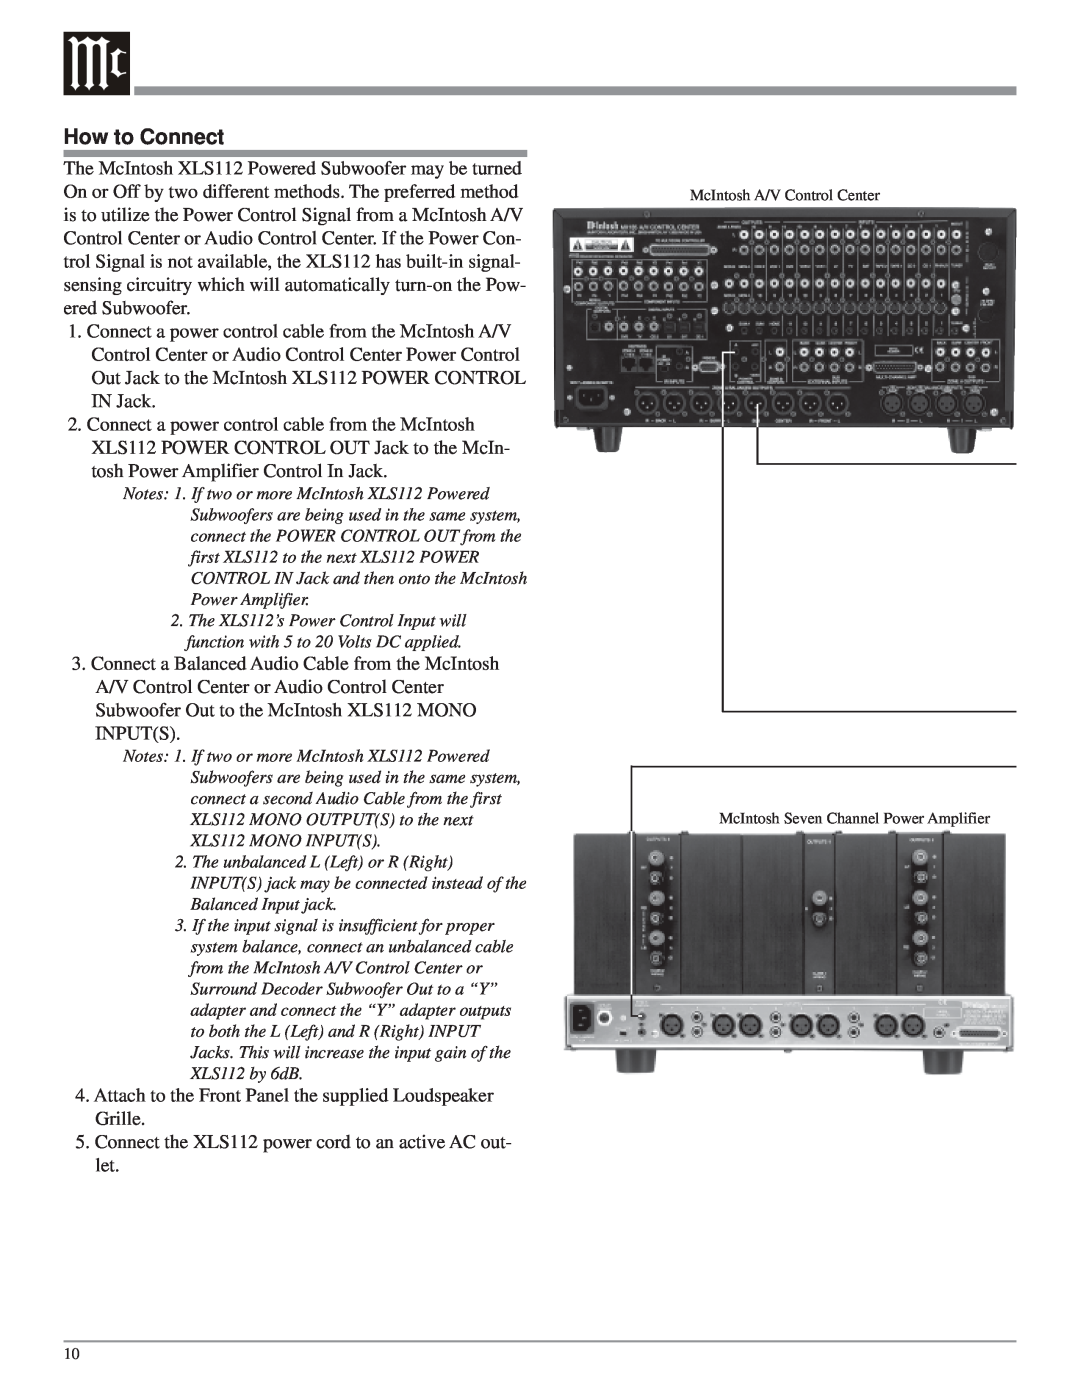 McIntosh XLS112 owner manual How to Connect, McIntosh A/V Control Center, McIntosh Seven Channel Power Amplifier 